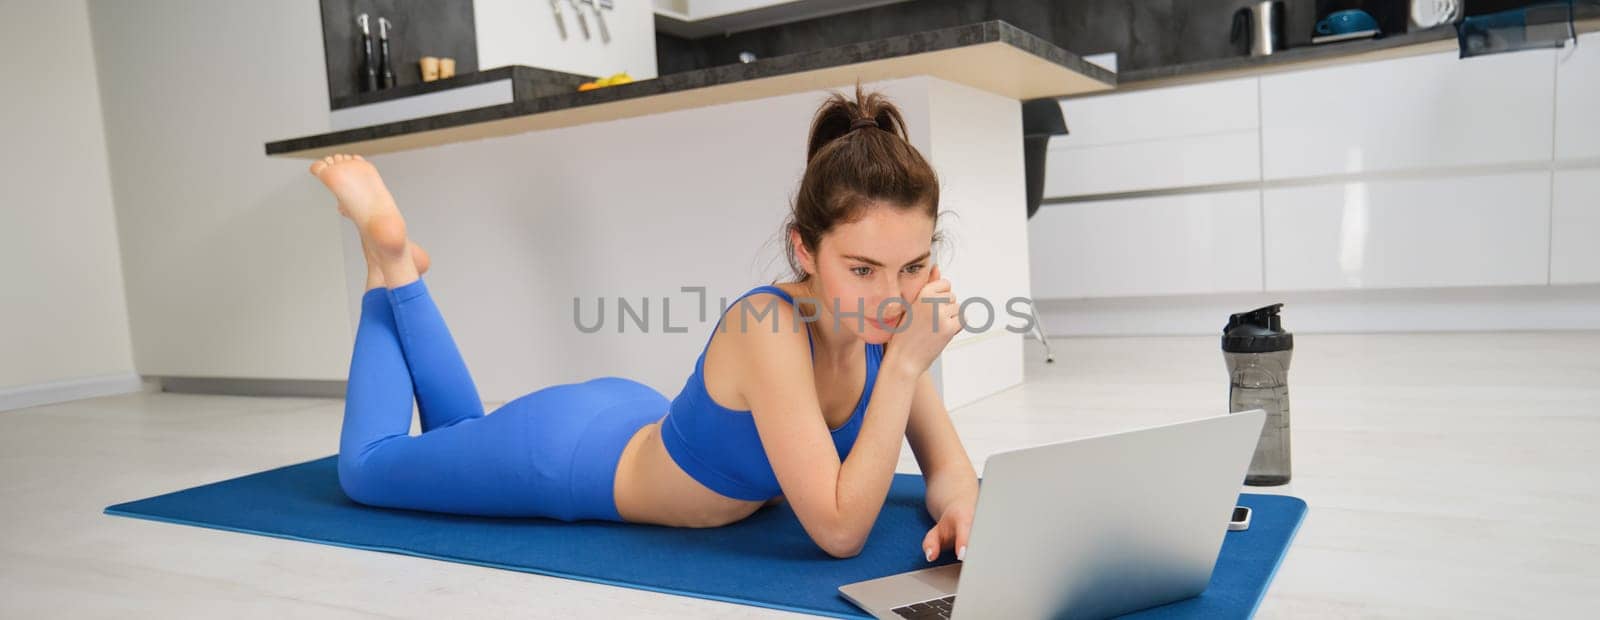 Image of fitness girl laying on yoga mat at home, watching video lesson workout on laptop.